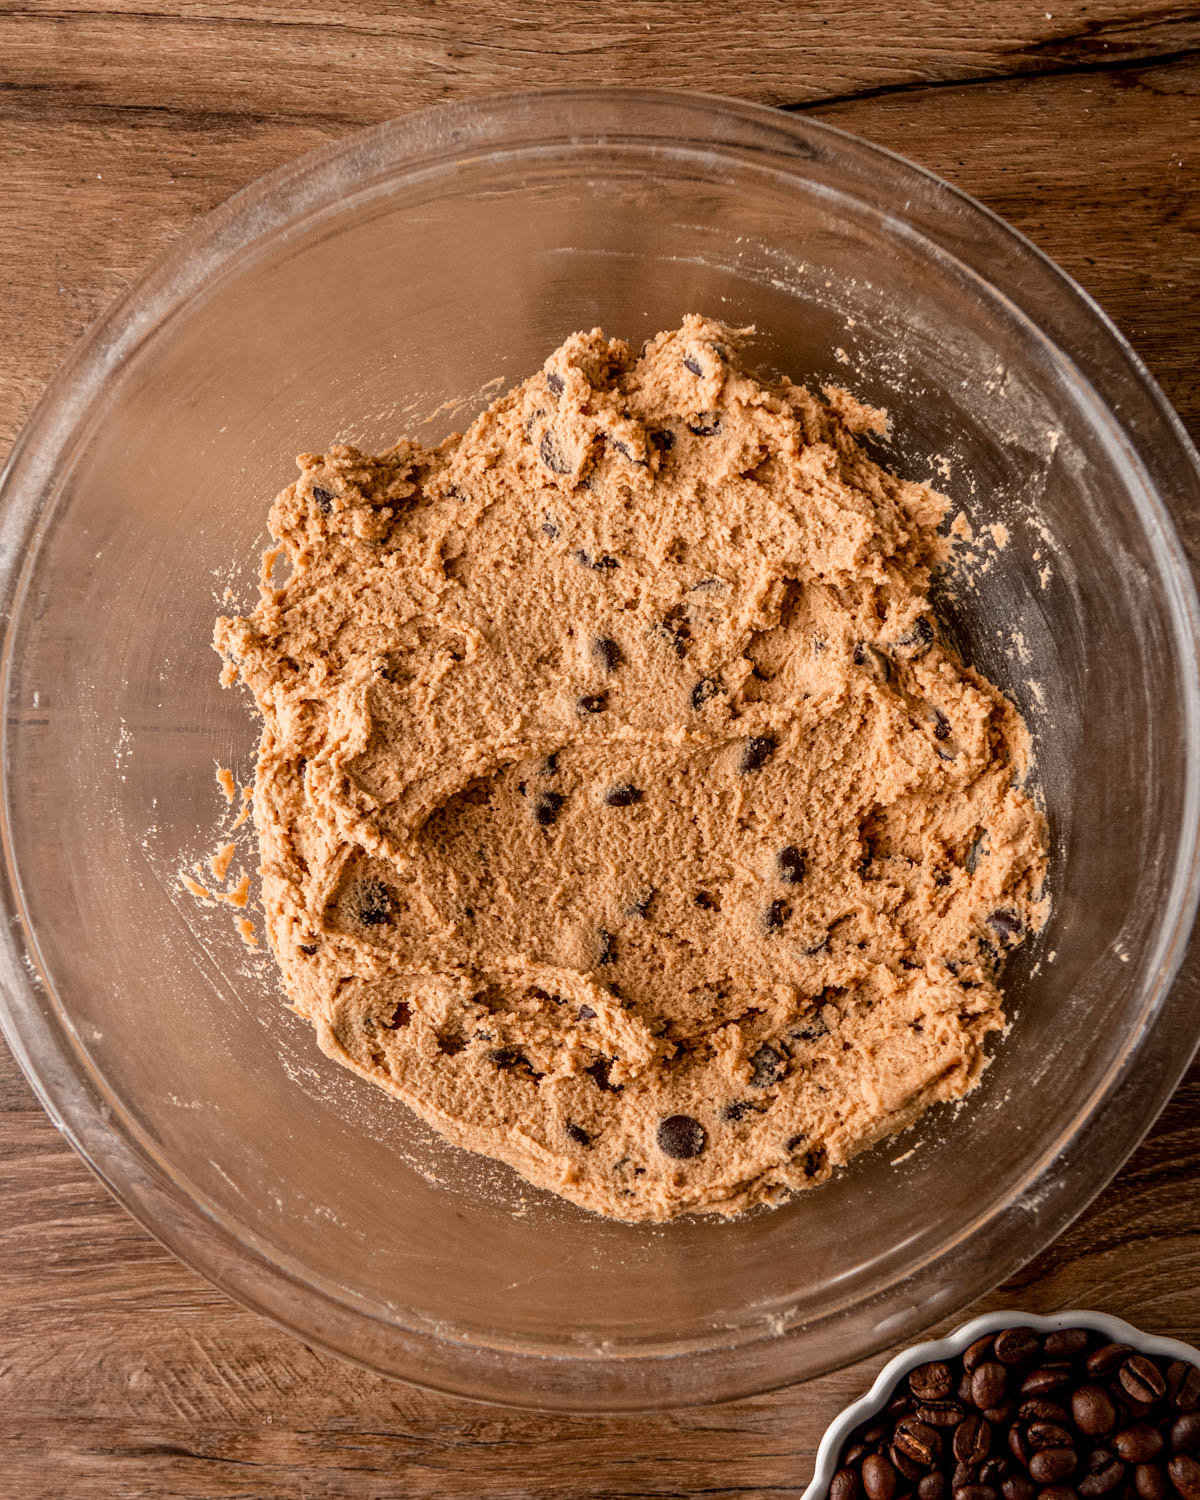 chocolate chips mixed into the cookie dough in a glass bowl on a wood board